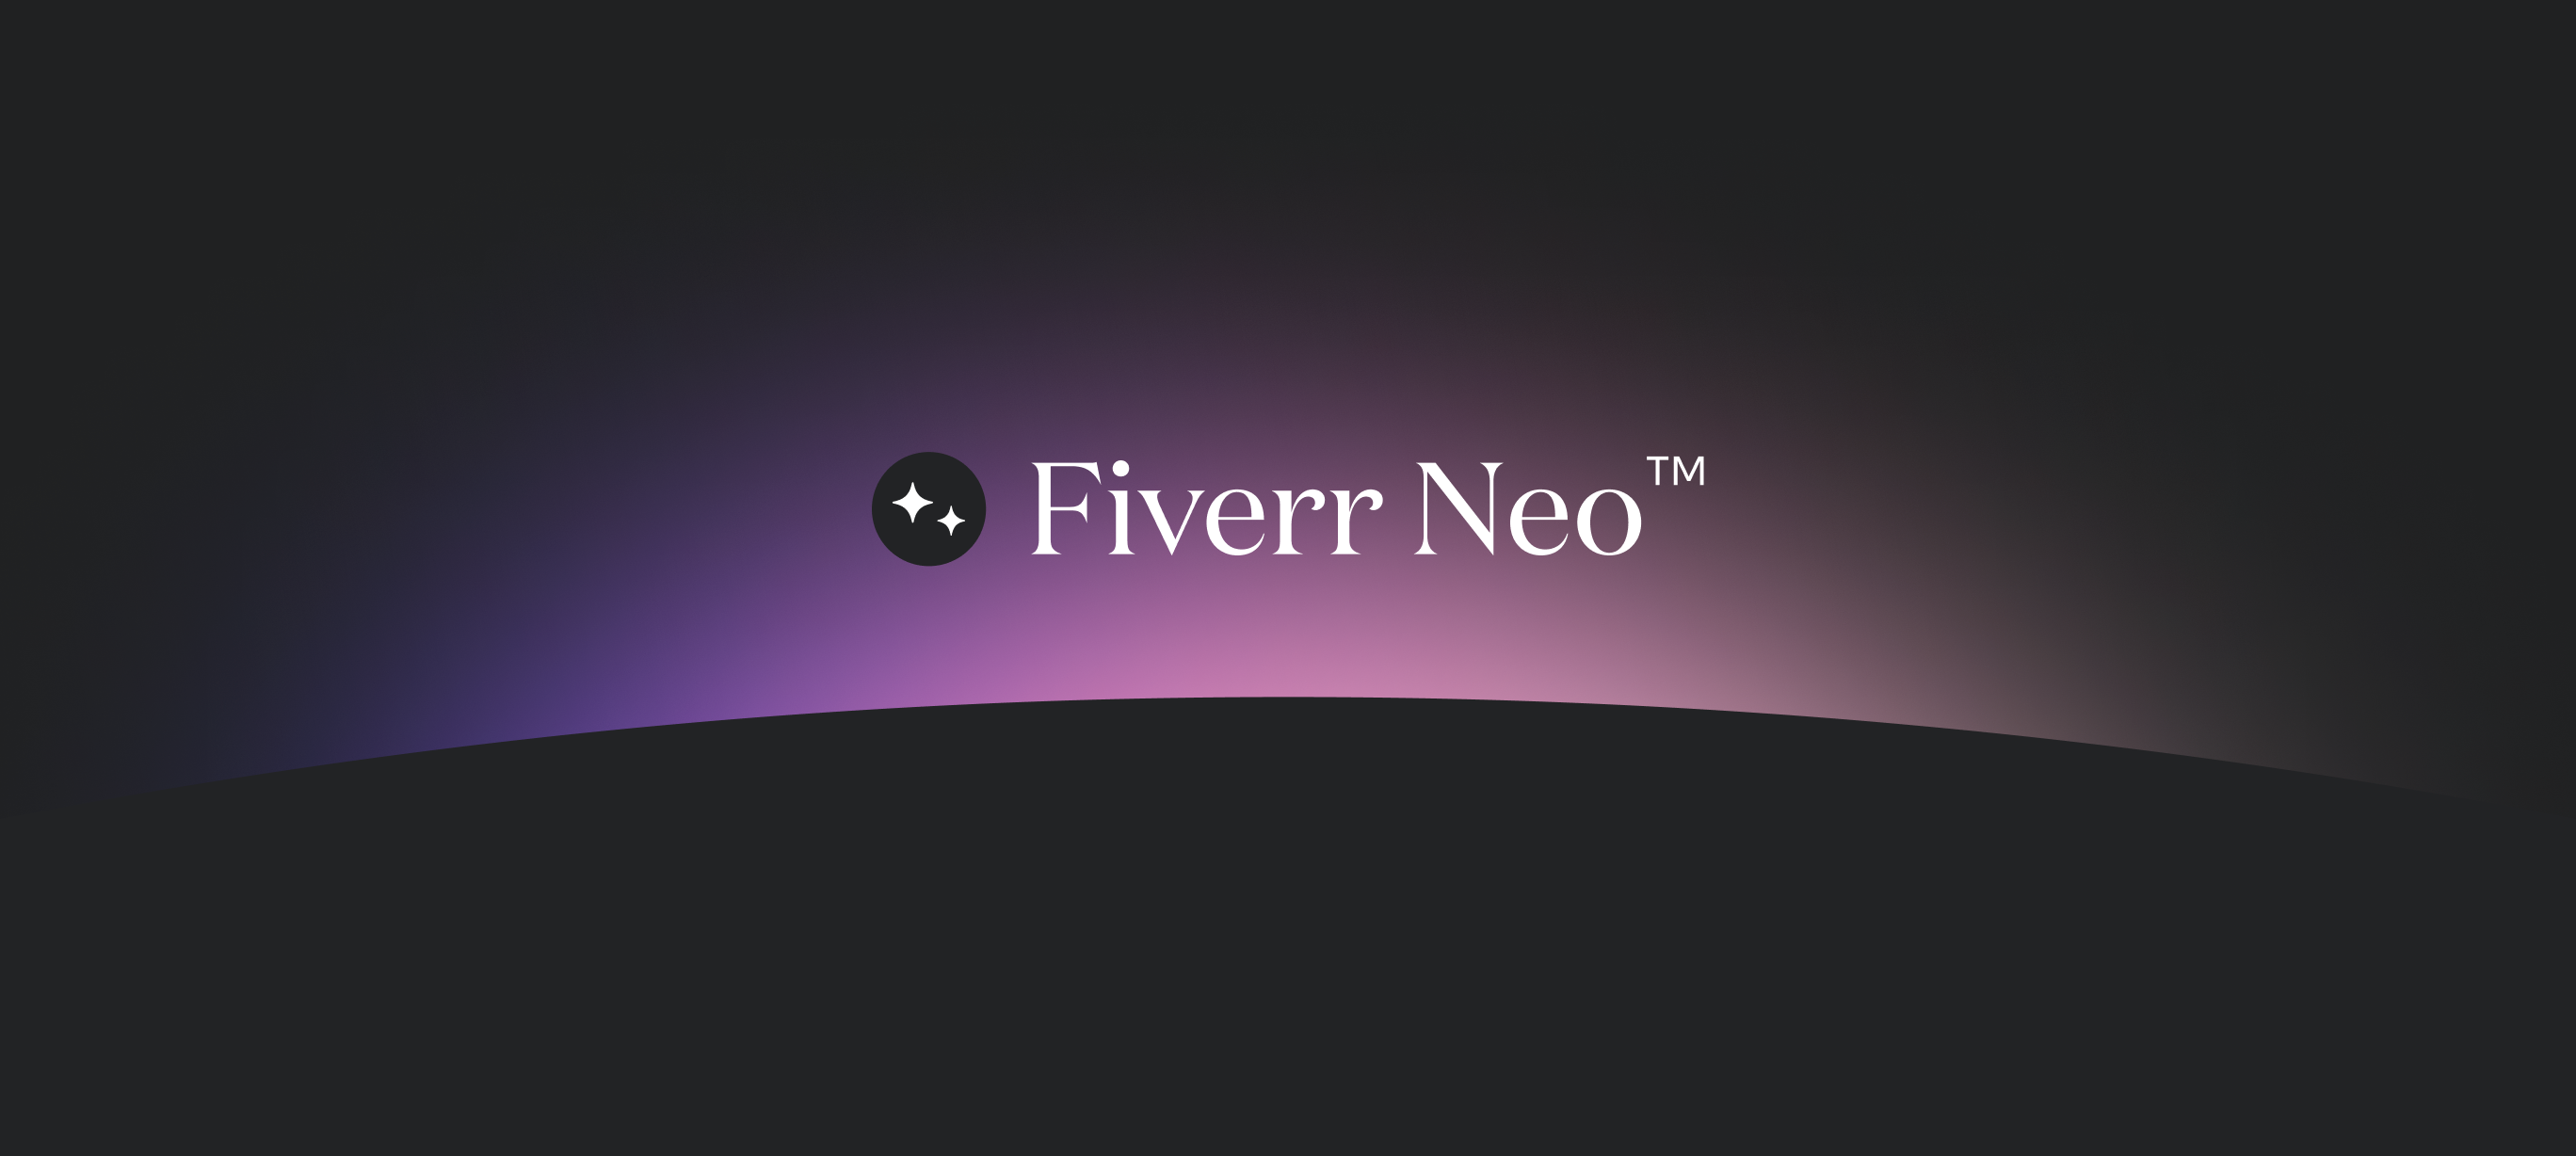 Fiverr Neo™: Fiverr&#039;s new AI matching tool